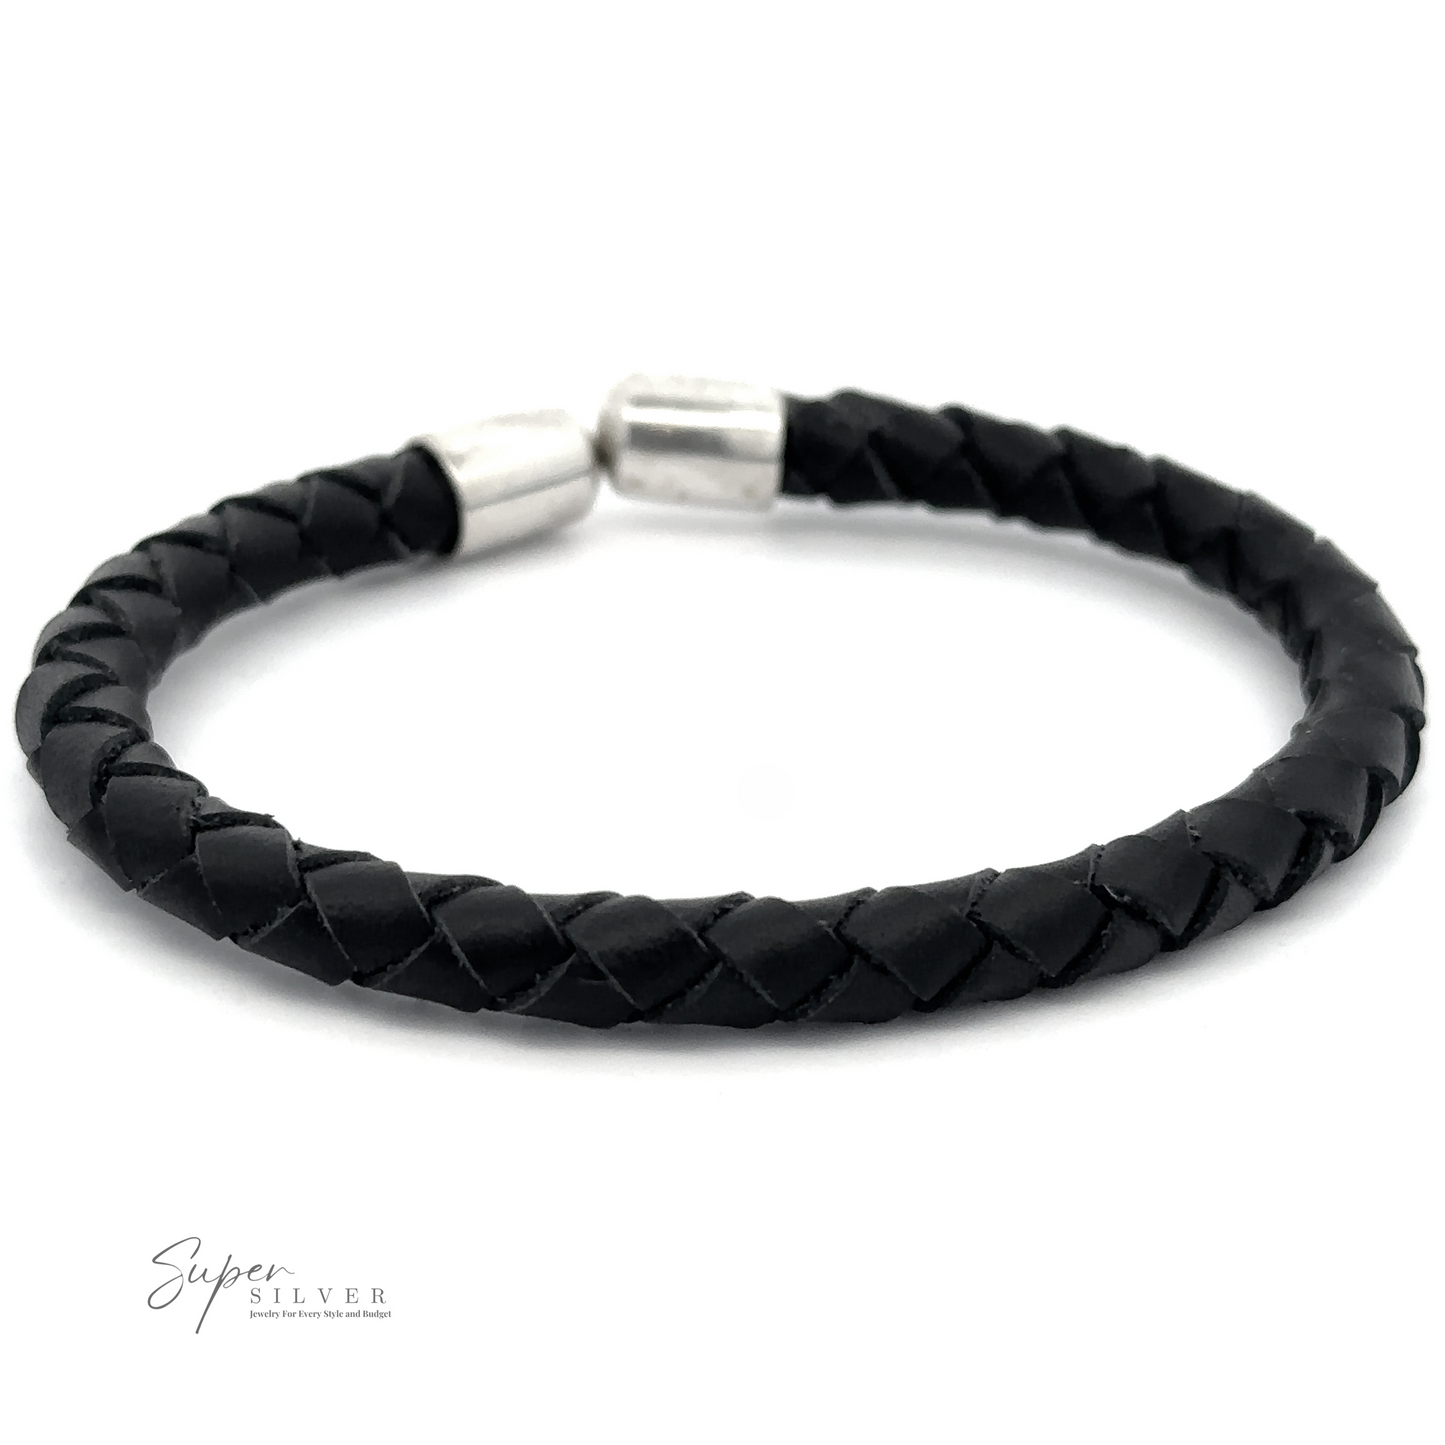 Black Braided Leather Bracelet with silver-tone caps, displayed on a plain white background. The "Super Silver" logo is visible in the bottom left corner, highlighting this stylish men's accessory.